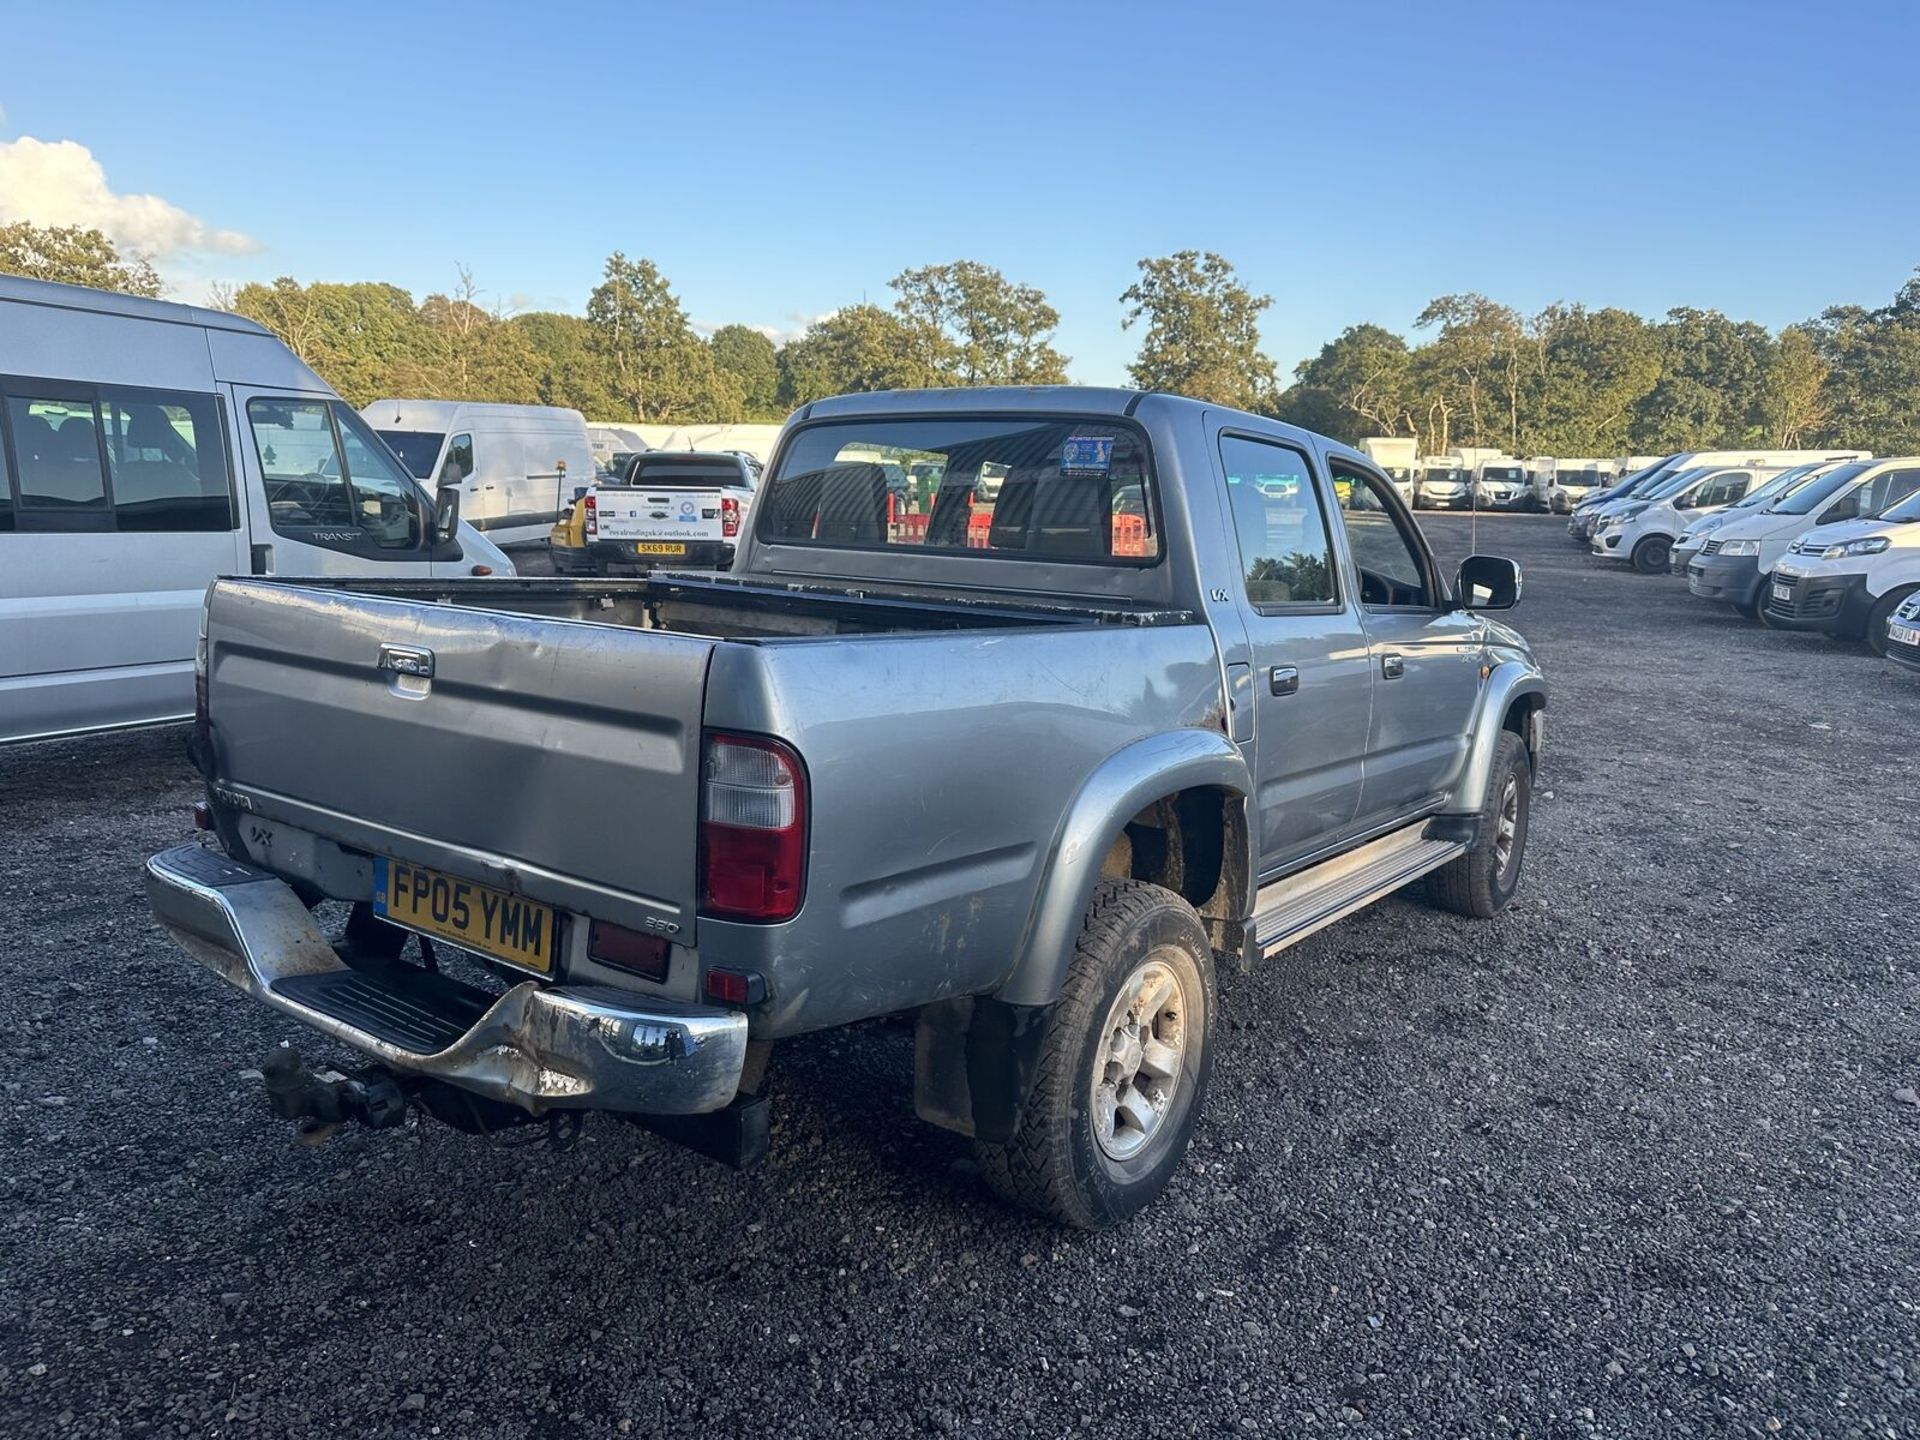 125K MILES - TOYOTA HILUX 4X4 WORKHORSE: WELL-MAINTAINED AND CAPABLE (NO VAT ON HAMMER) - Image 2 of 15